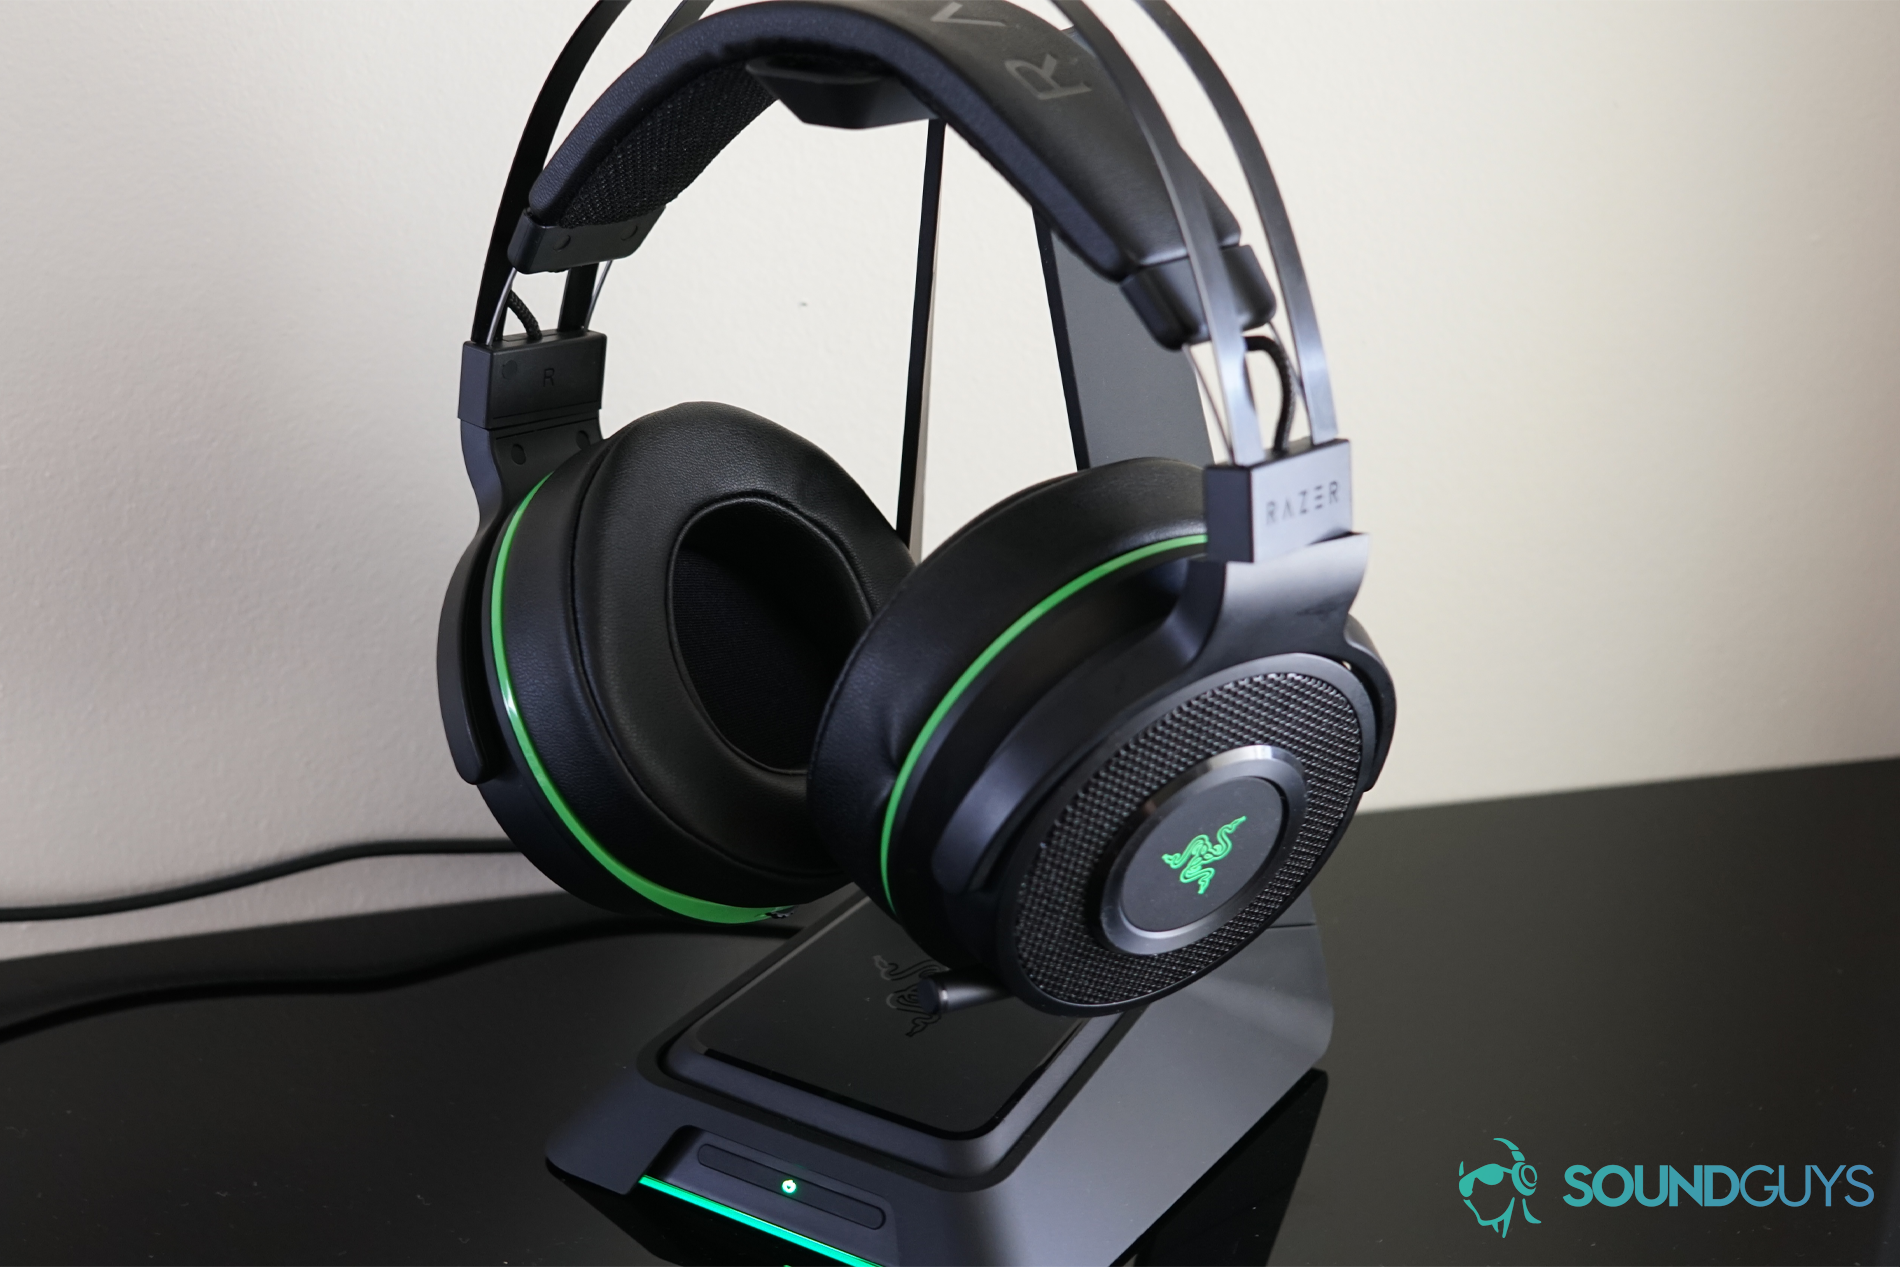 Razer Ultimate: Rock solid gaming headset for XBox, PC